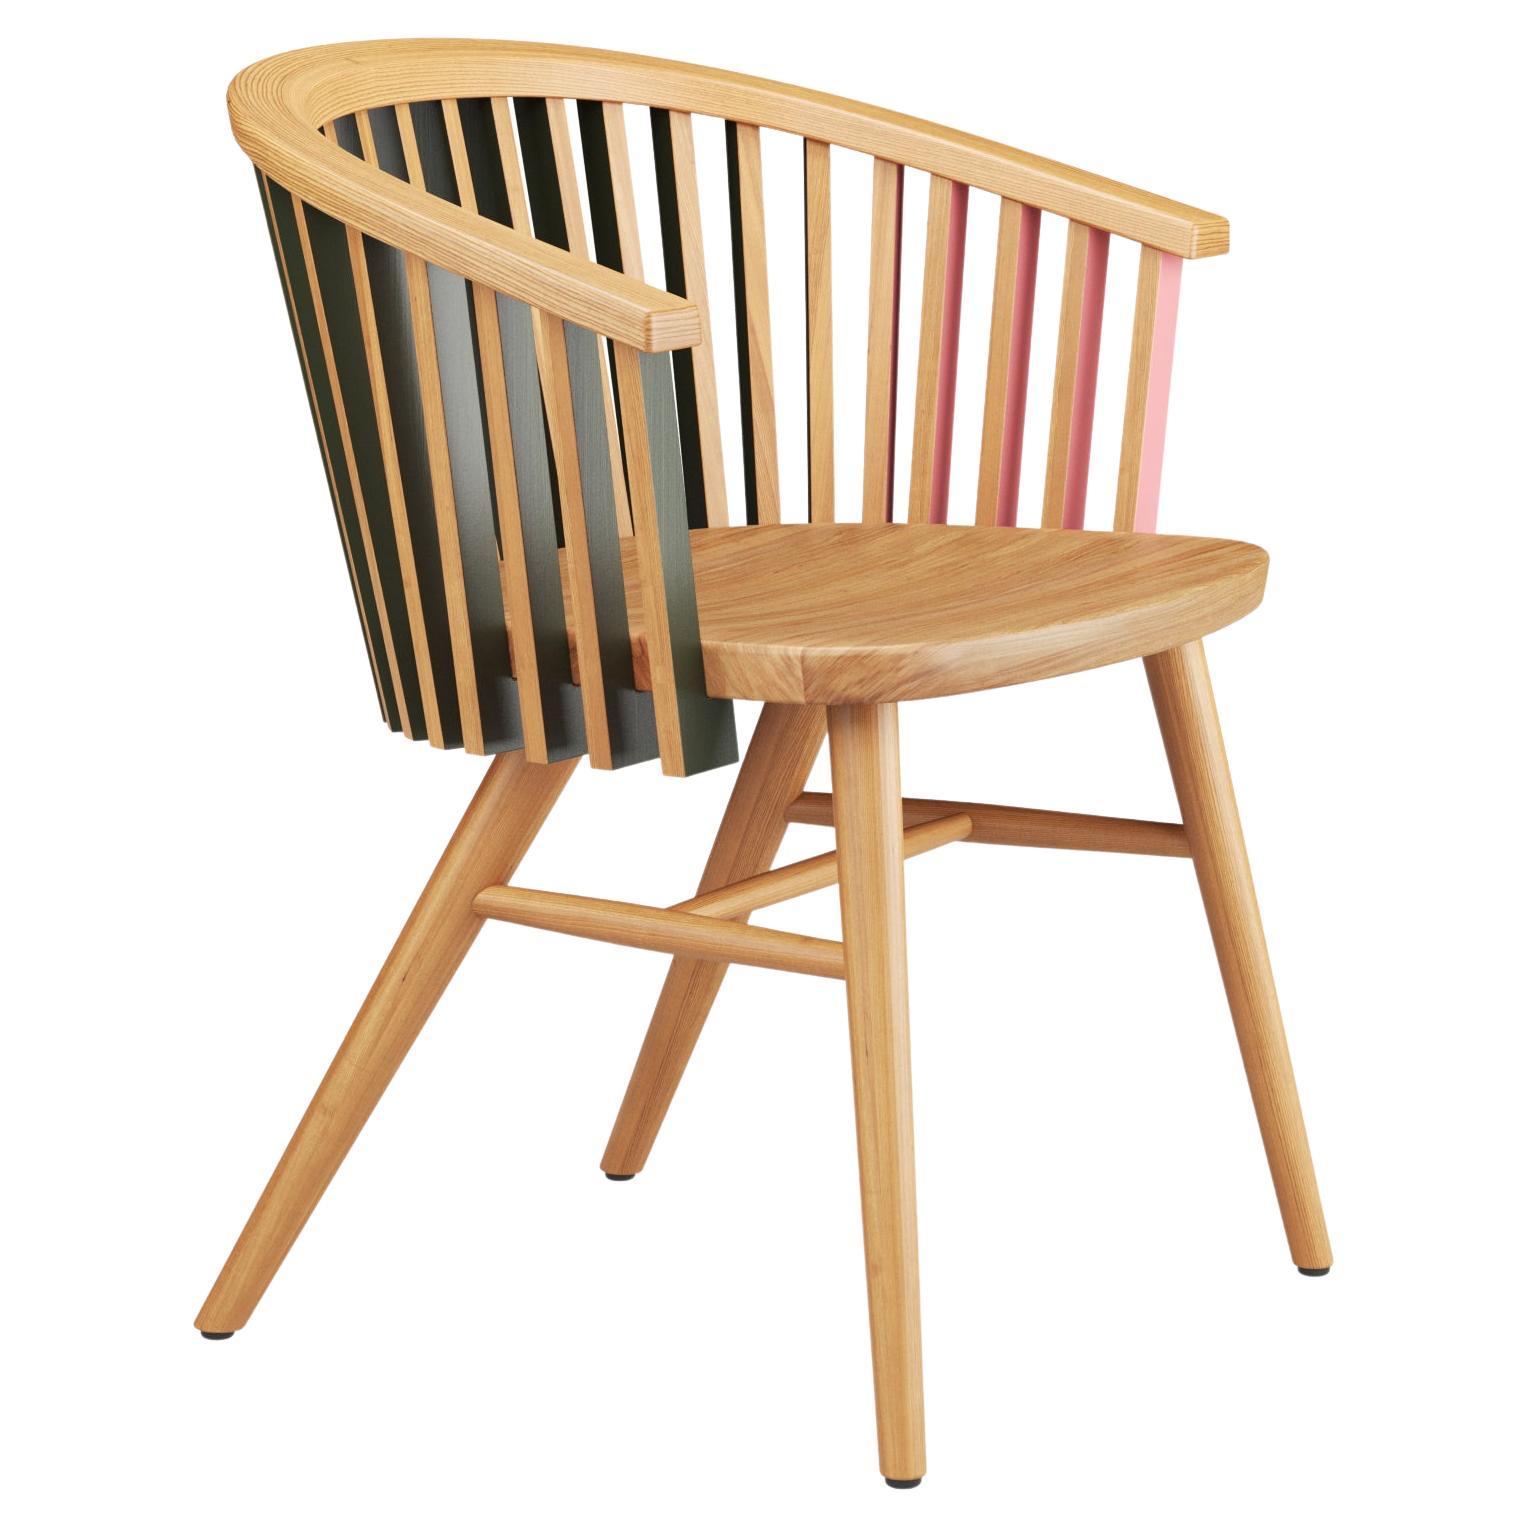 Hayche, Tornasol Rounded chair, Oak, Green & Pink, Solid Wood, UK, Made To Order For Sale